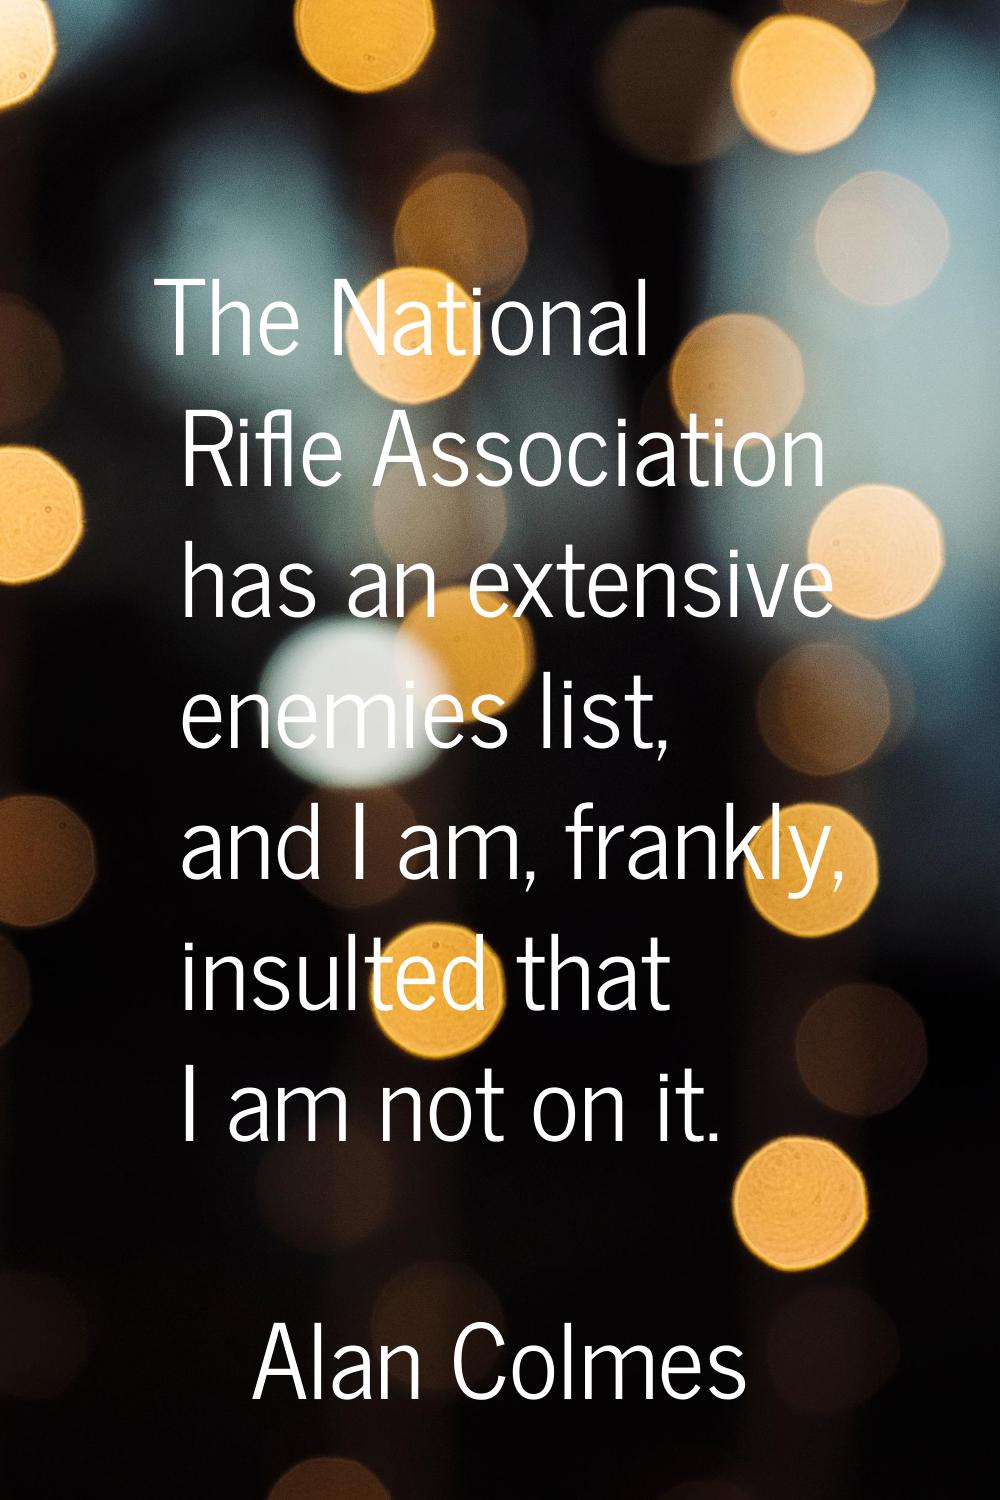 The National Rifle Association has an extensive enemies list, and I am, frankly, insulted that I am